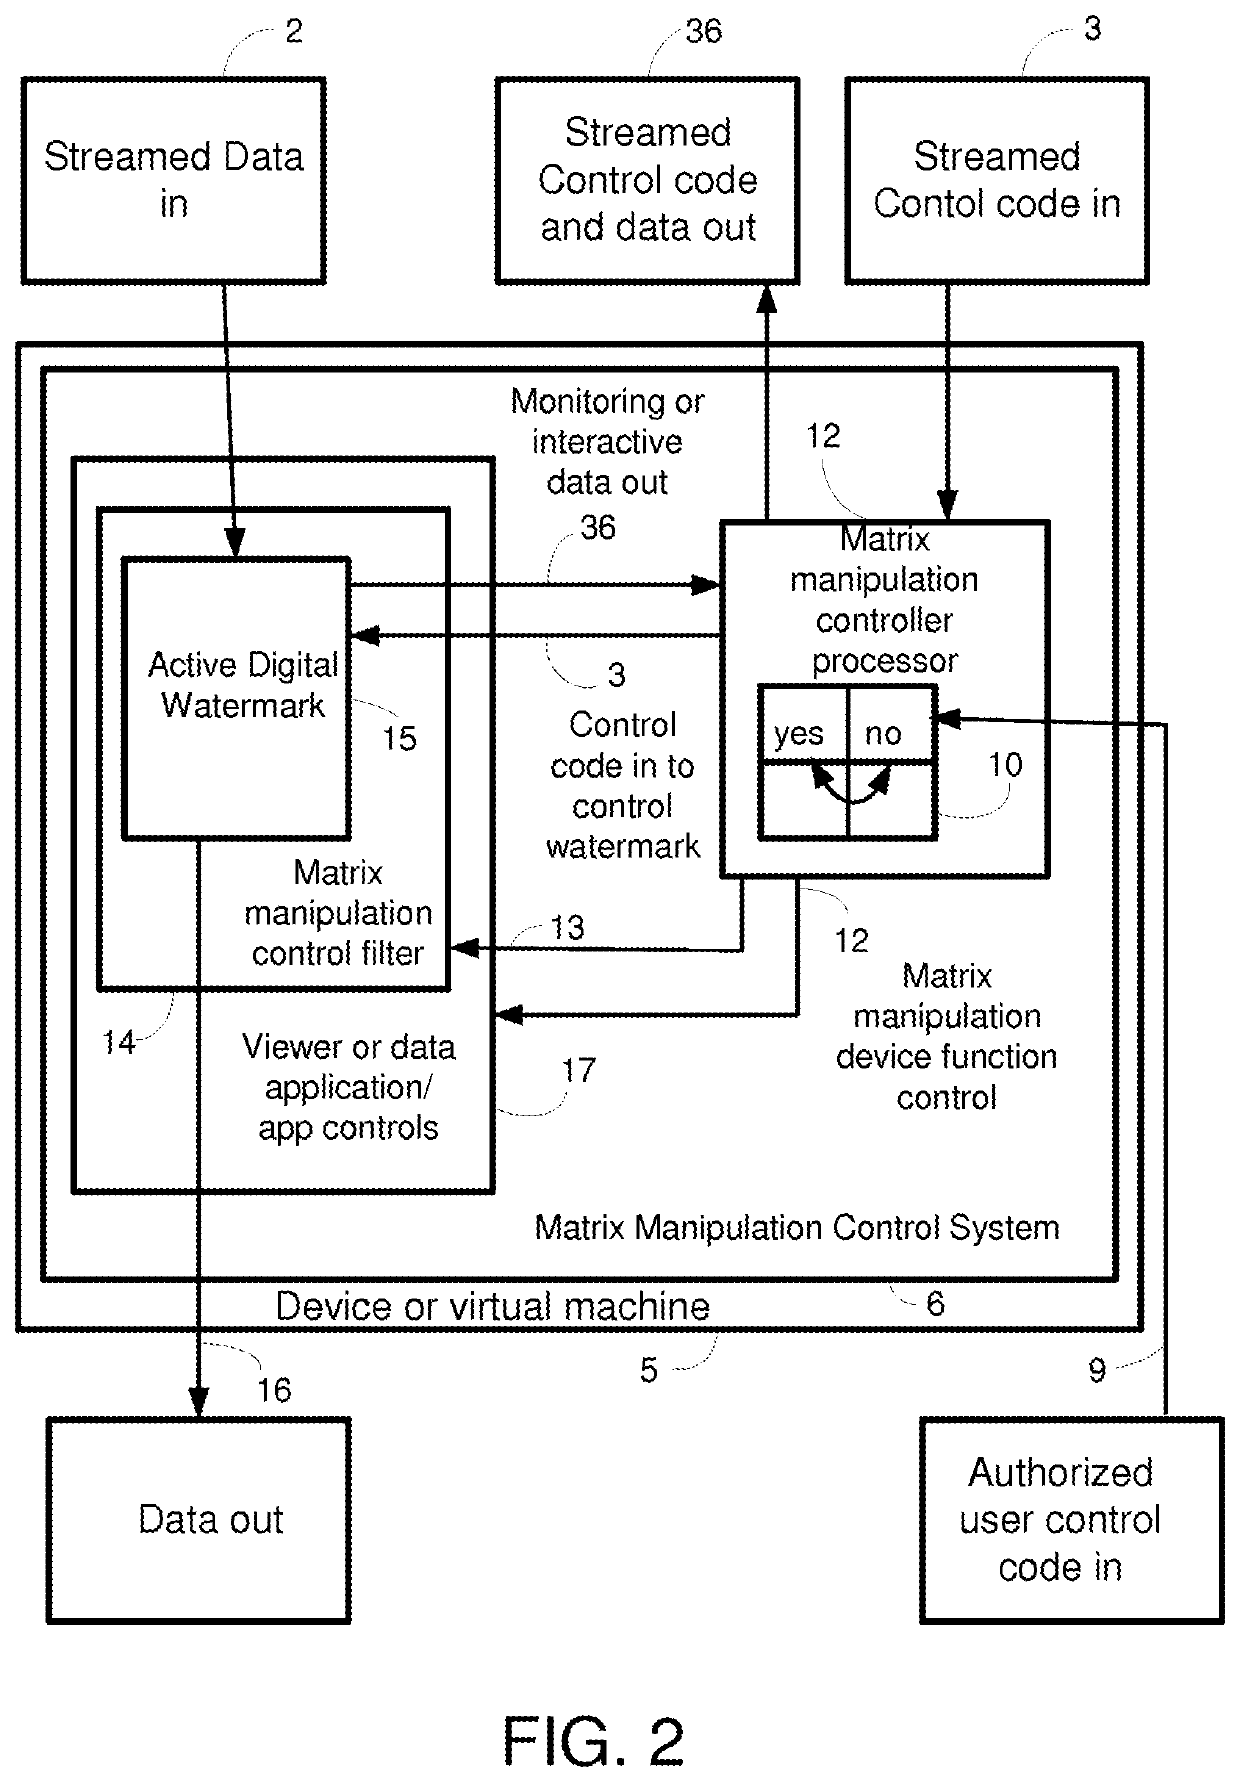 System for Interactive Matrix Manipulation Control of Streamed Data